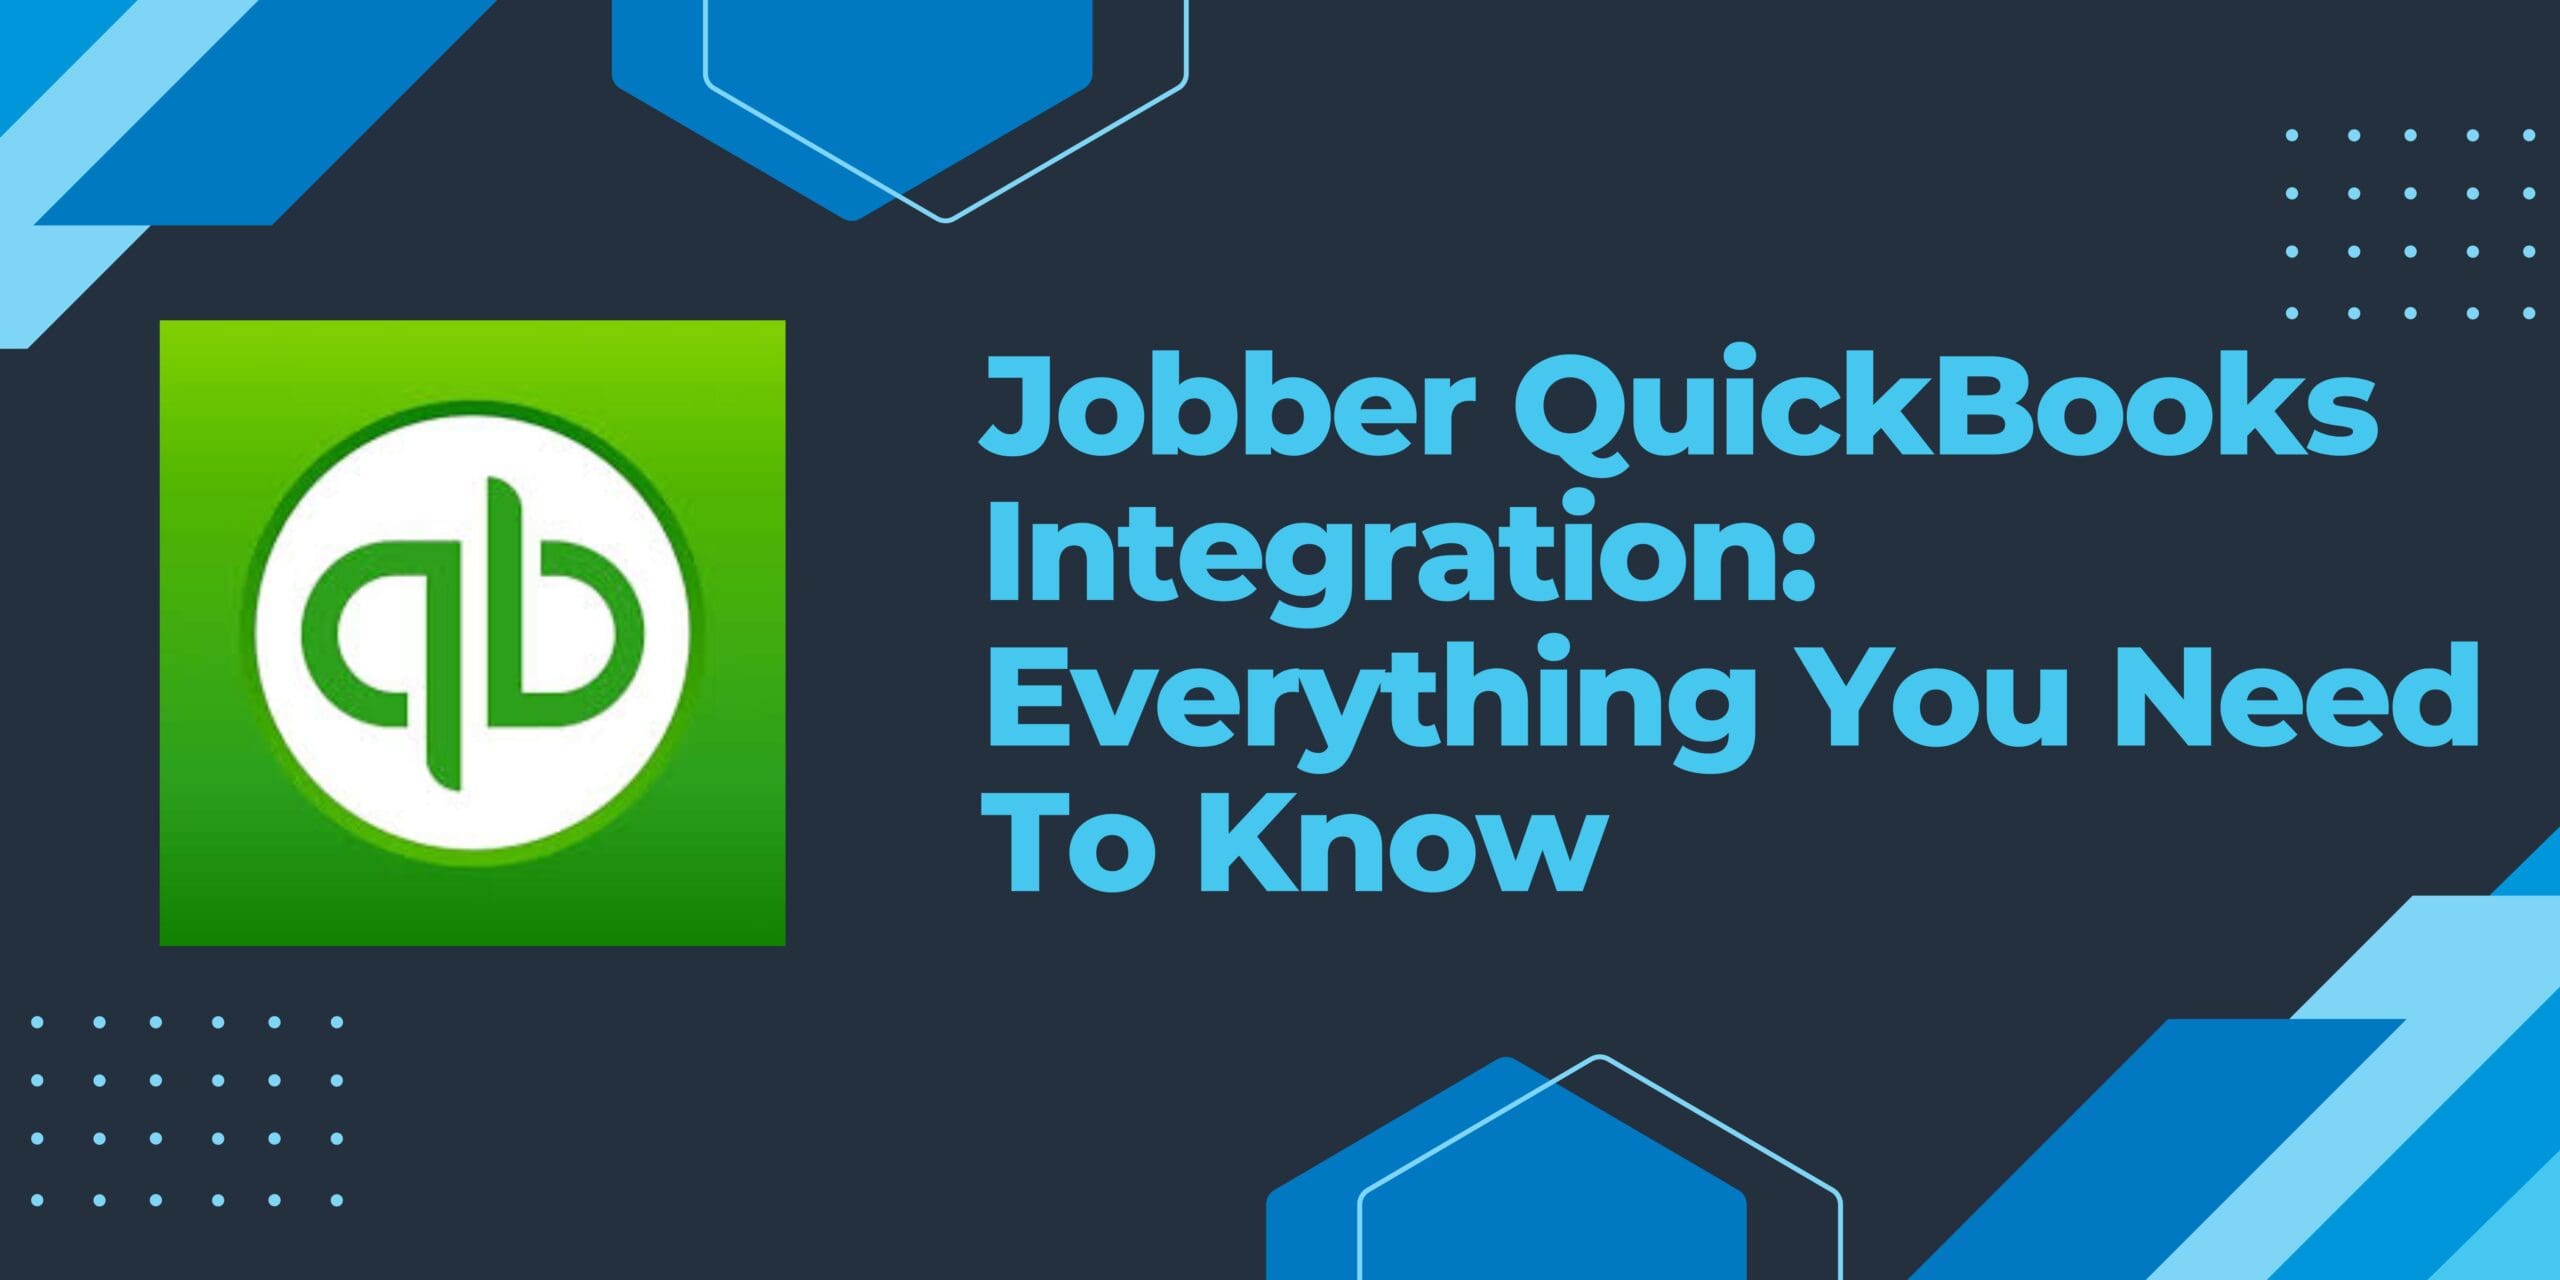 Jobber QuickBooks Integration: Everything You Need To Know